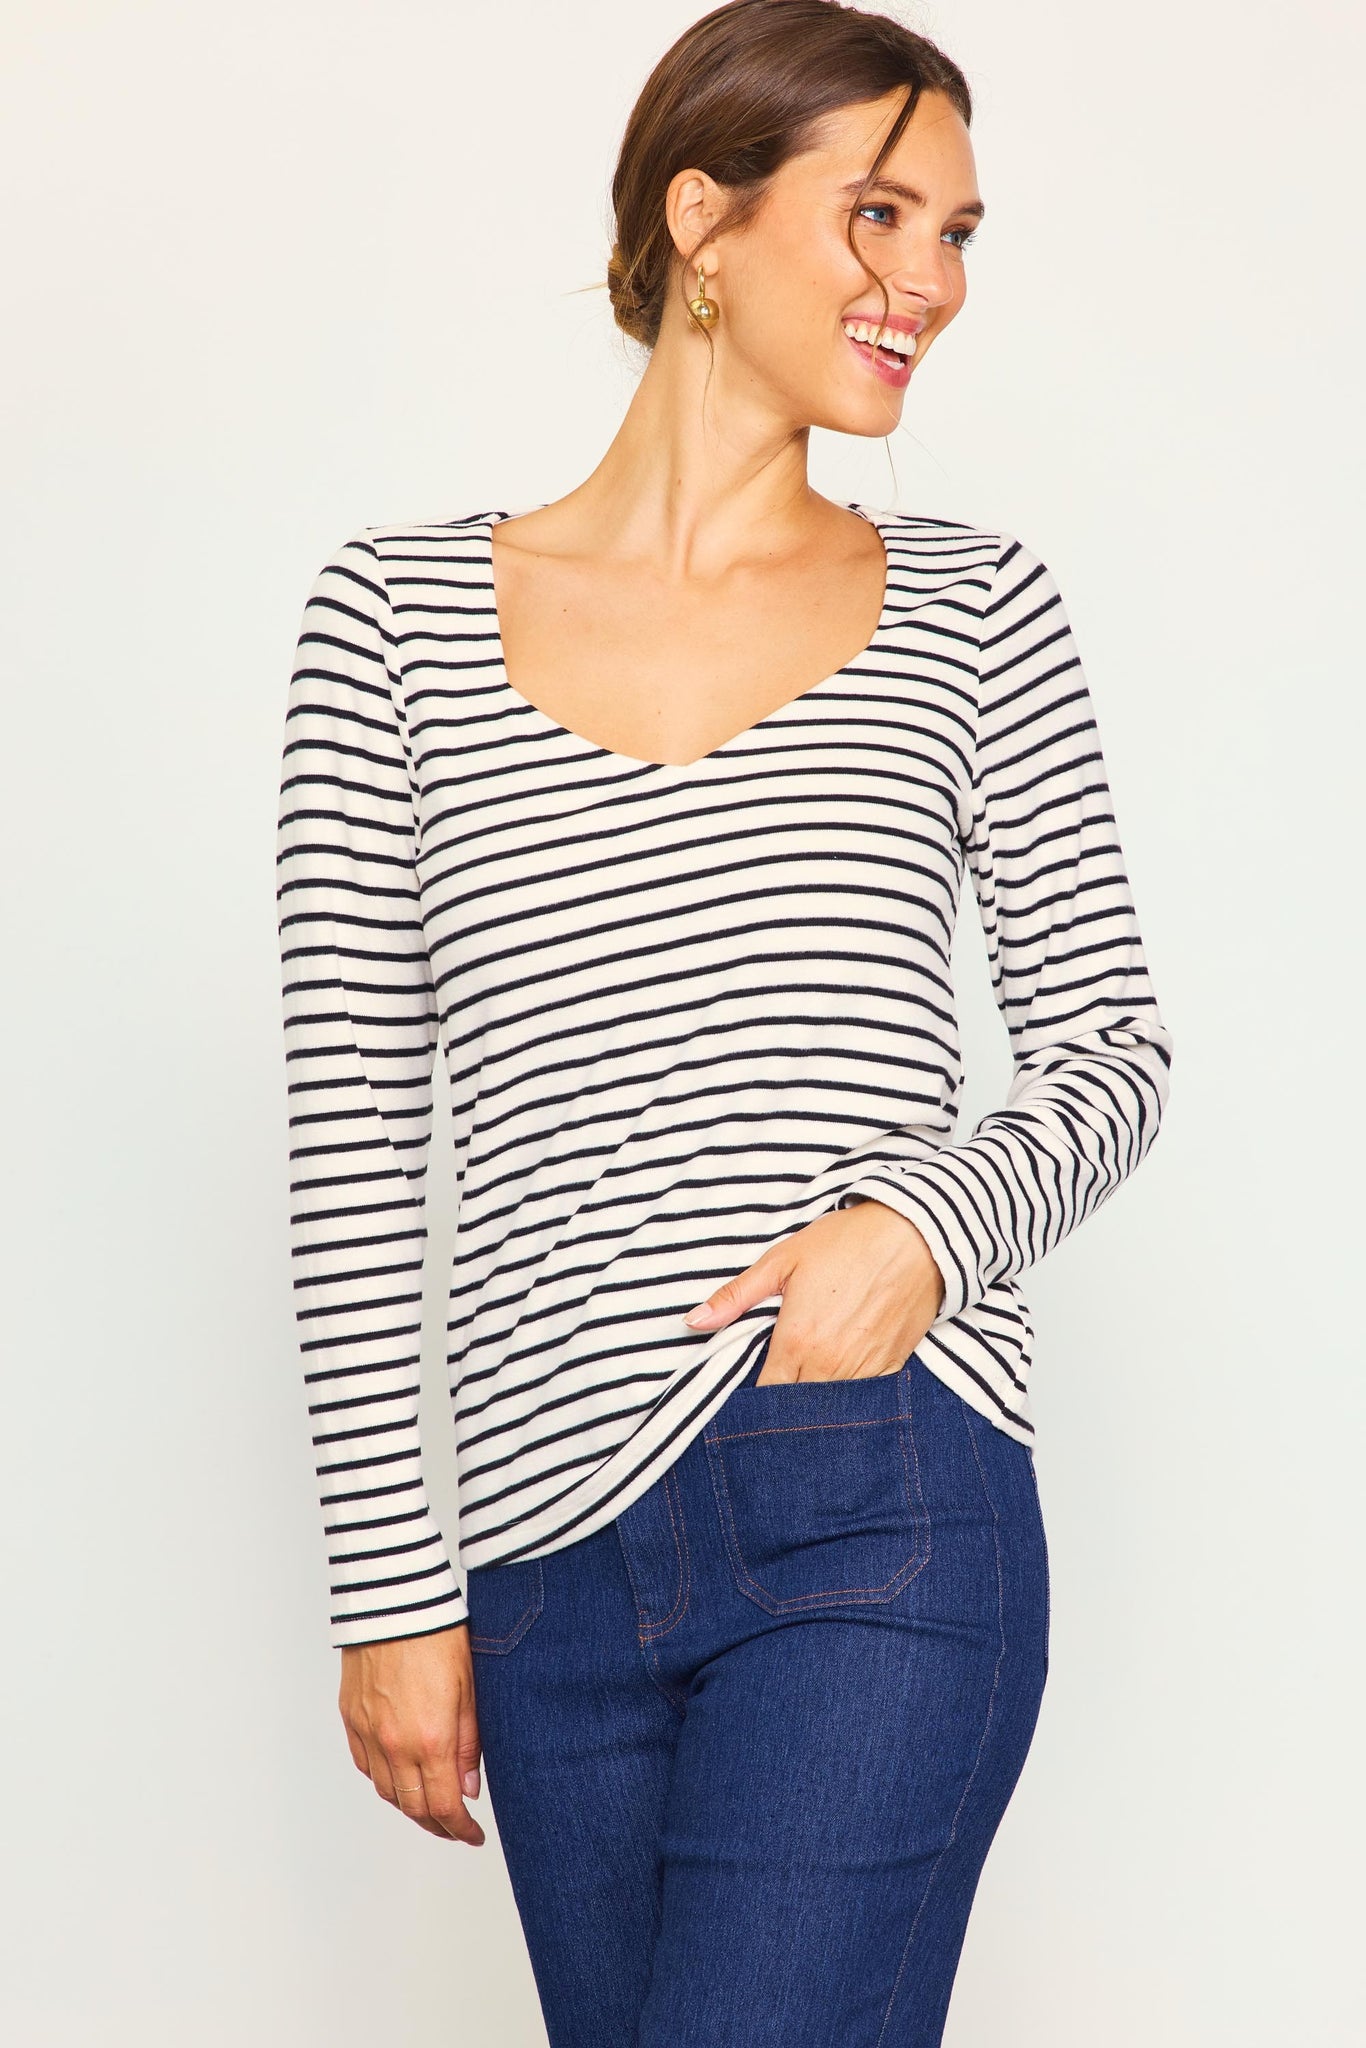 Mary Striped Top